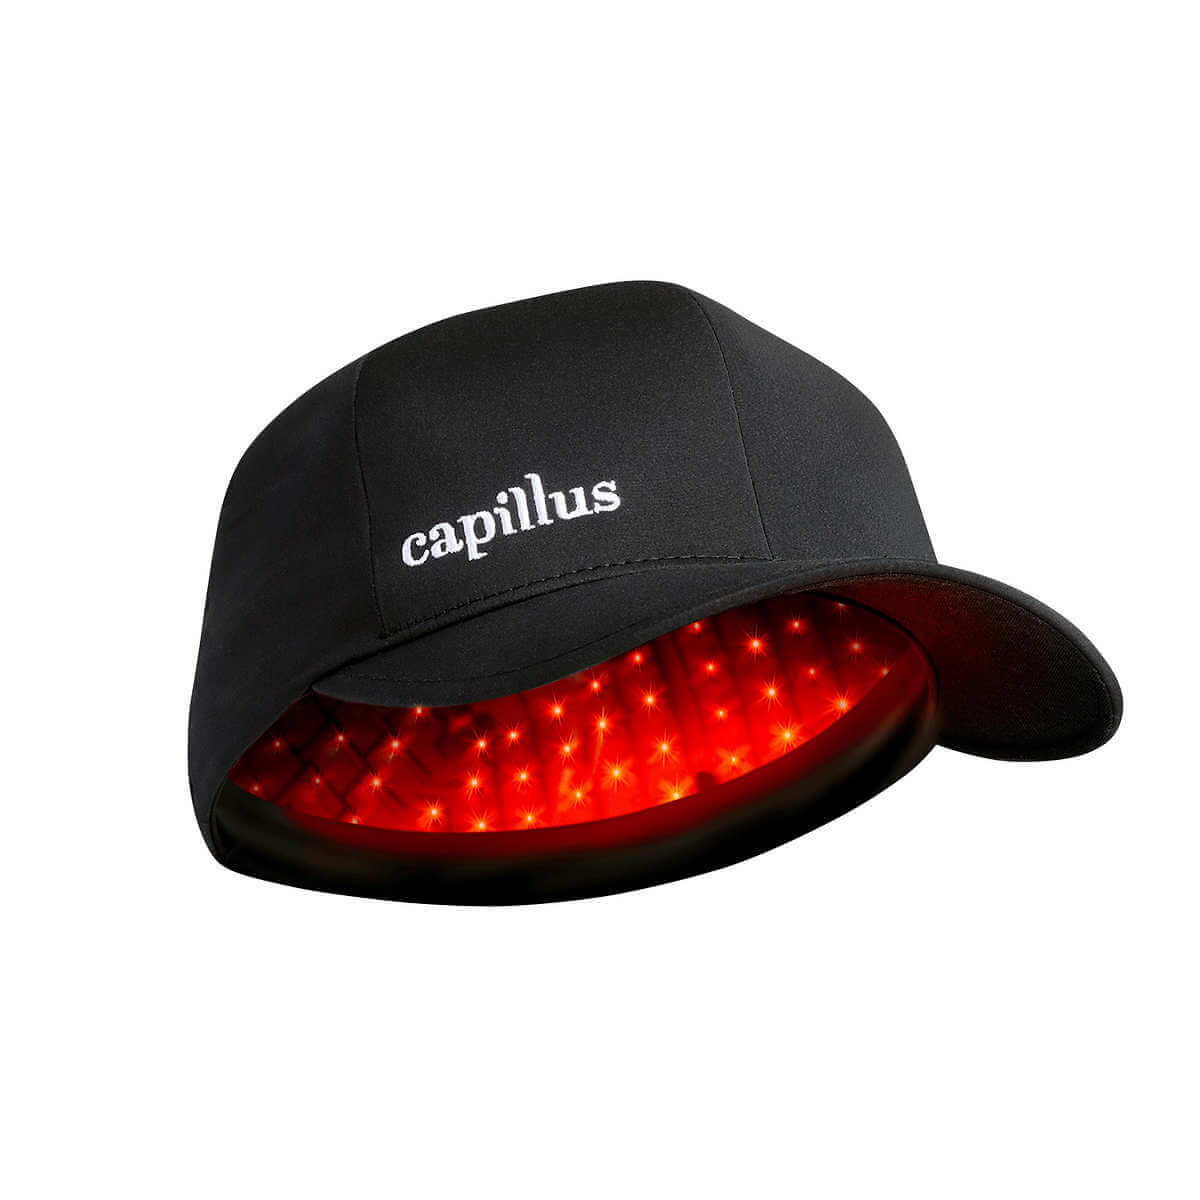 capillus-pro-cap-with-272-laser-diodes-for-hair-regrowth-therapy_3